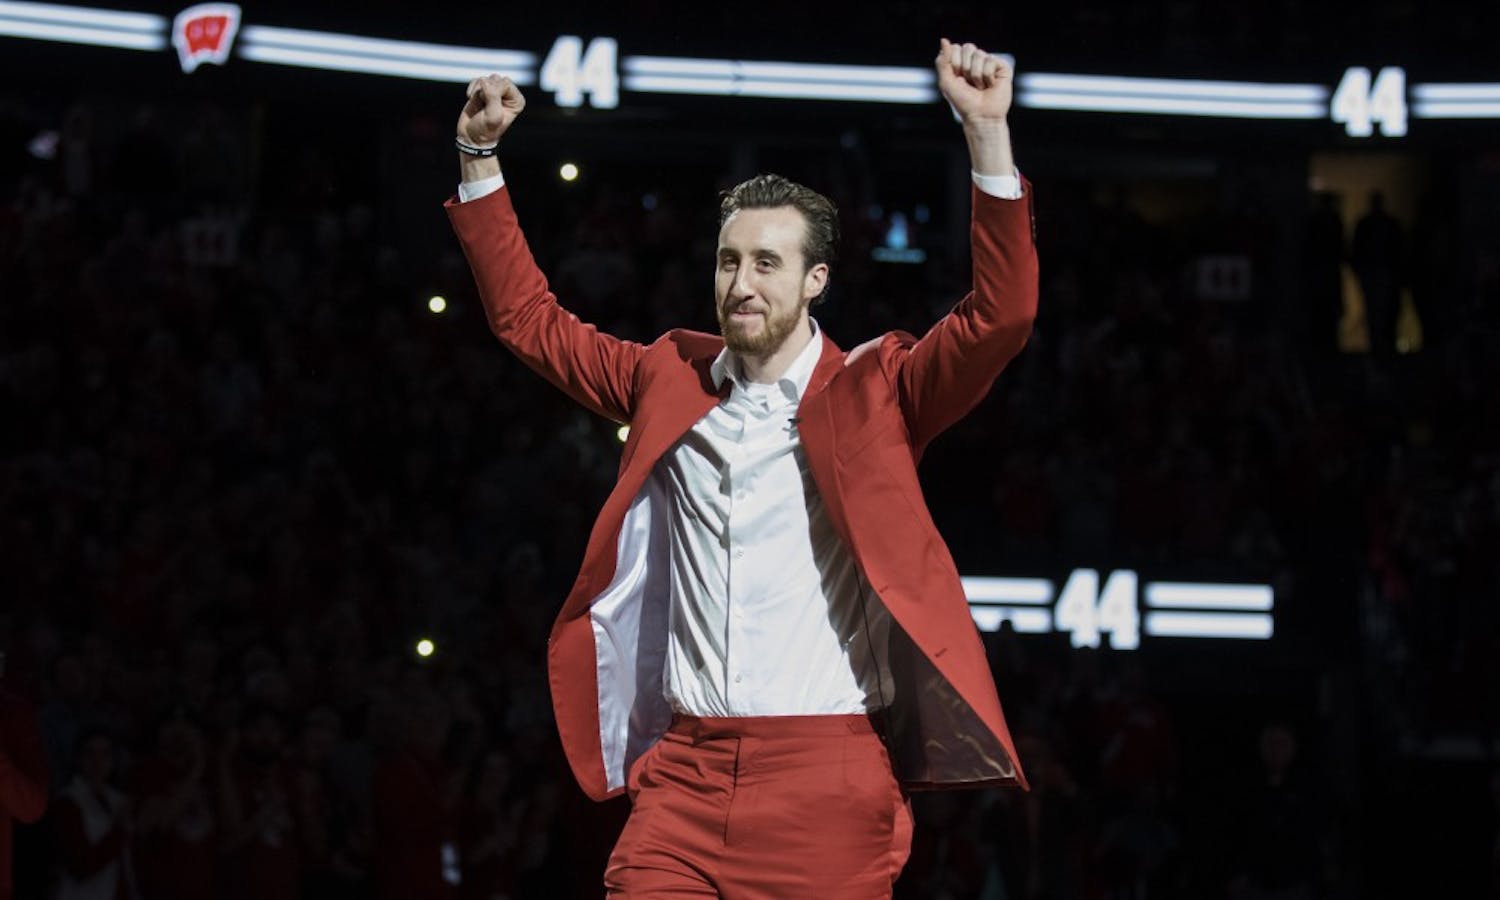 Forty-Forever: Kaminsky's number raised to the rafters in emotional tribute